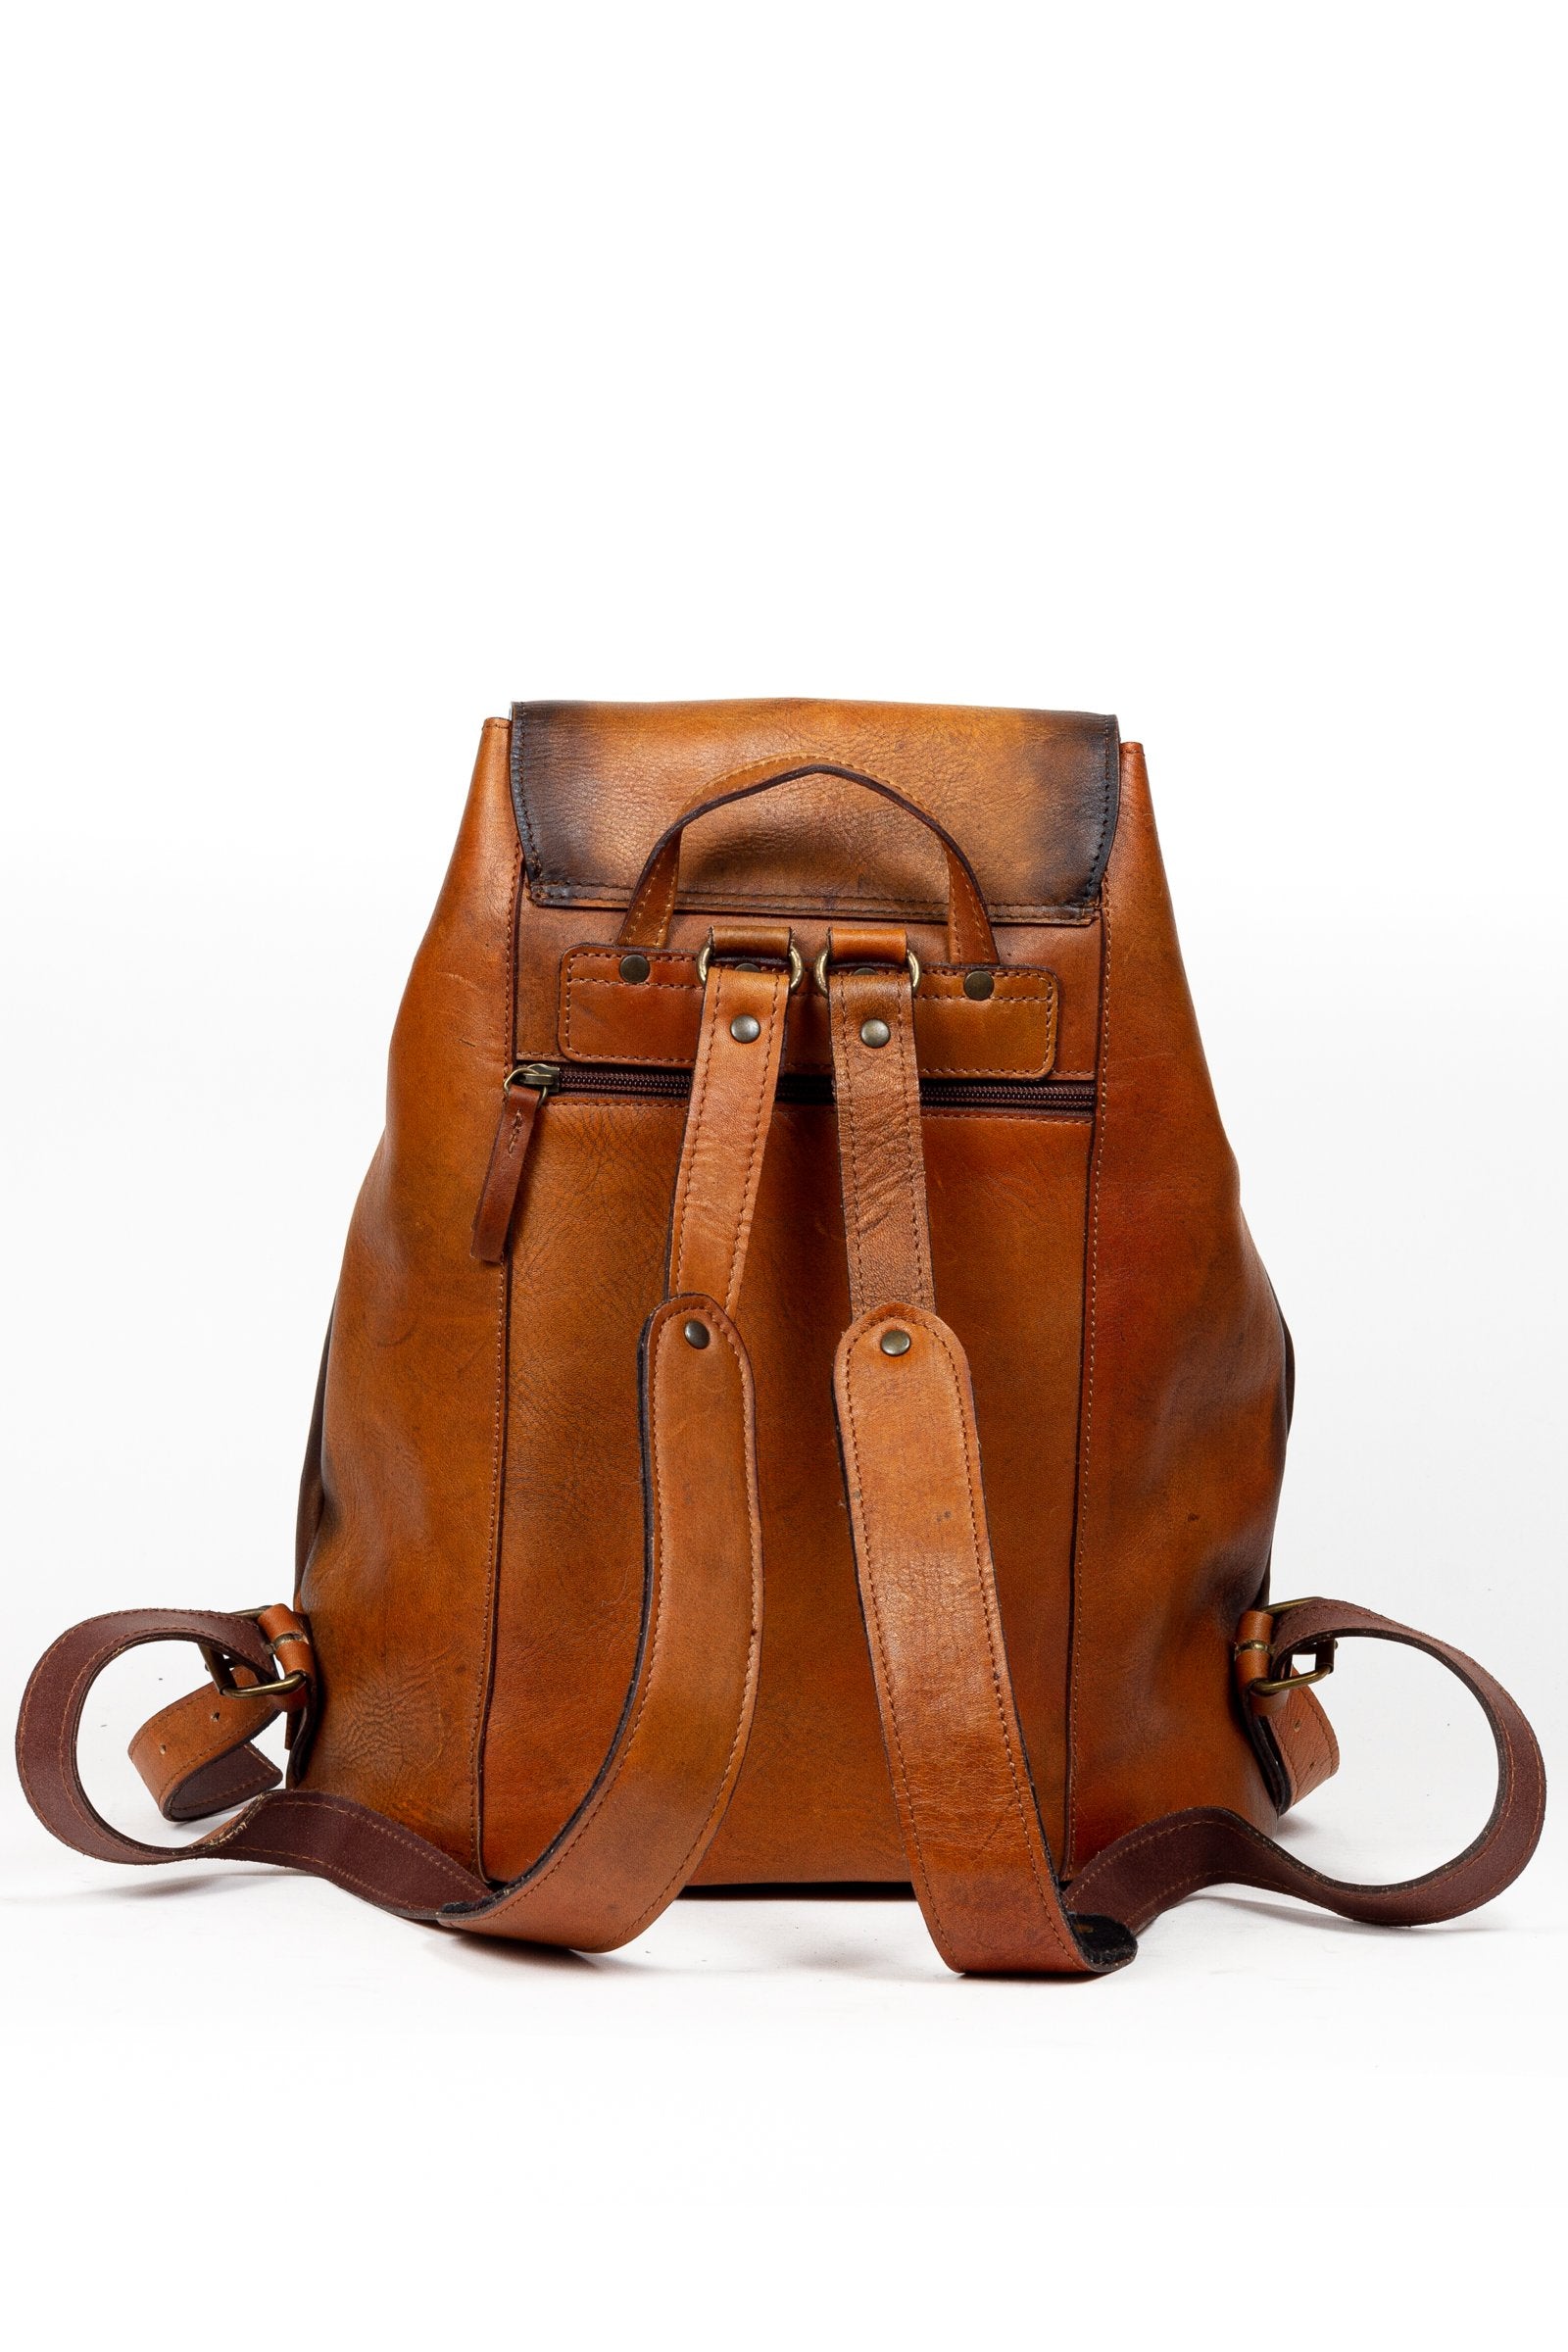 BEON.COM.AU The Jost Randers Heritage Backpack is a leather bag made in Europe from premium European leathers and fabrics. Cowhide Spacious main compartment, can fit A4 documents Drawstrin closure and snap closure on the flap Mobile phone holder, plug-in, zipped pocket and 2 pen loops Front pocket with flap ... Jost at BEON.COM.AU